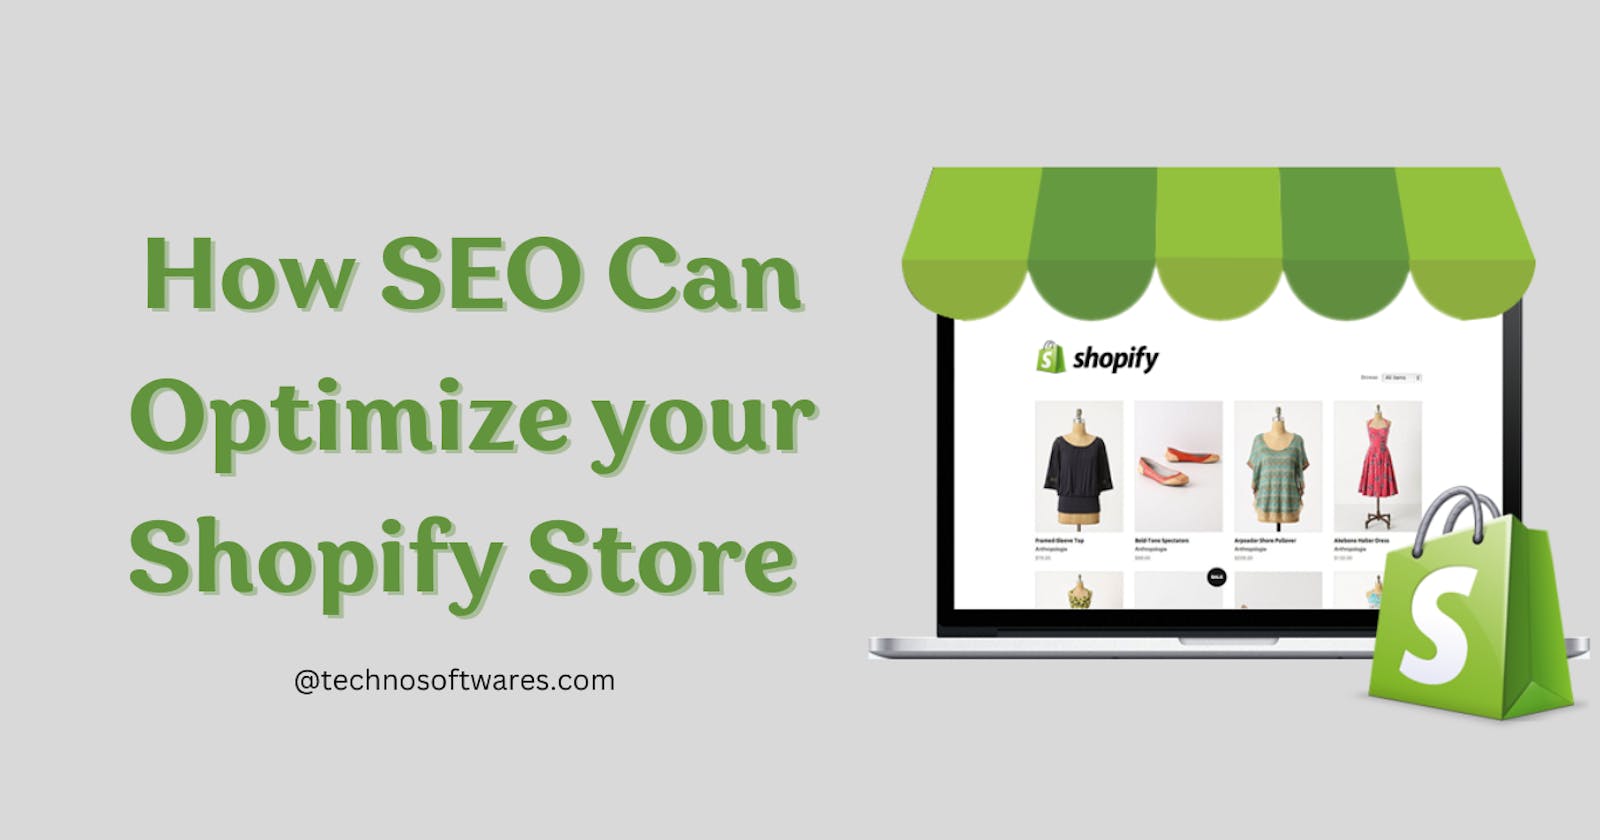 How SEO Can Optimize your Shopify Store